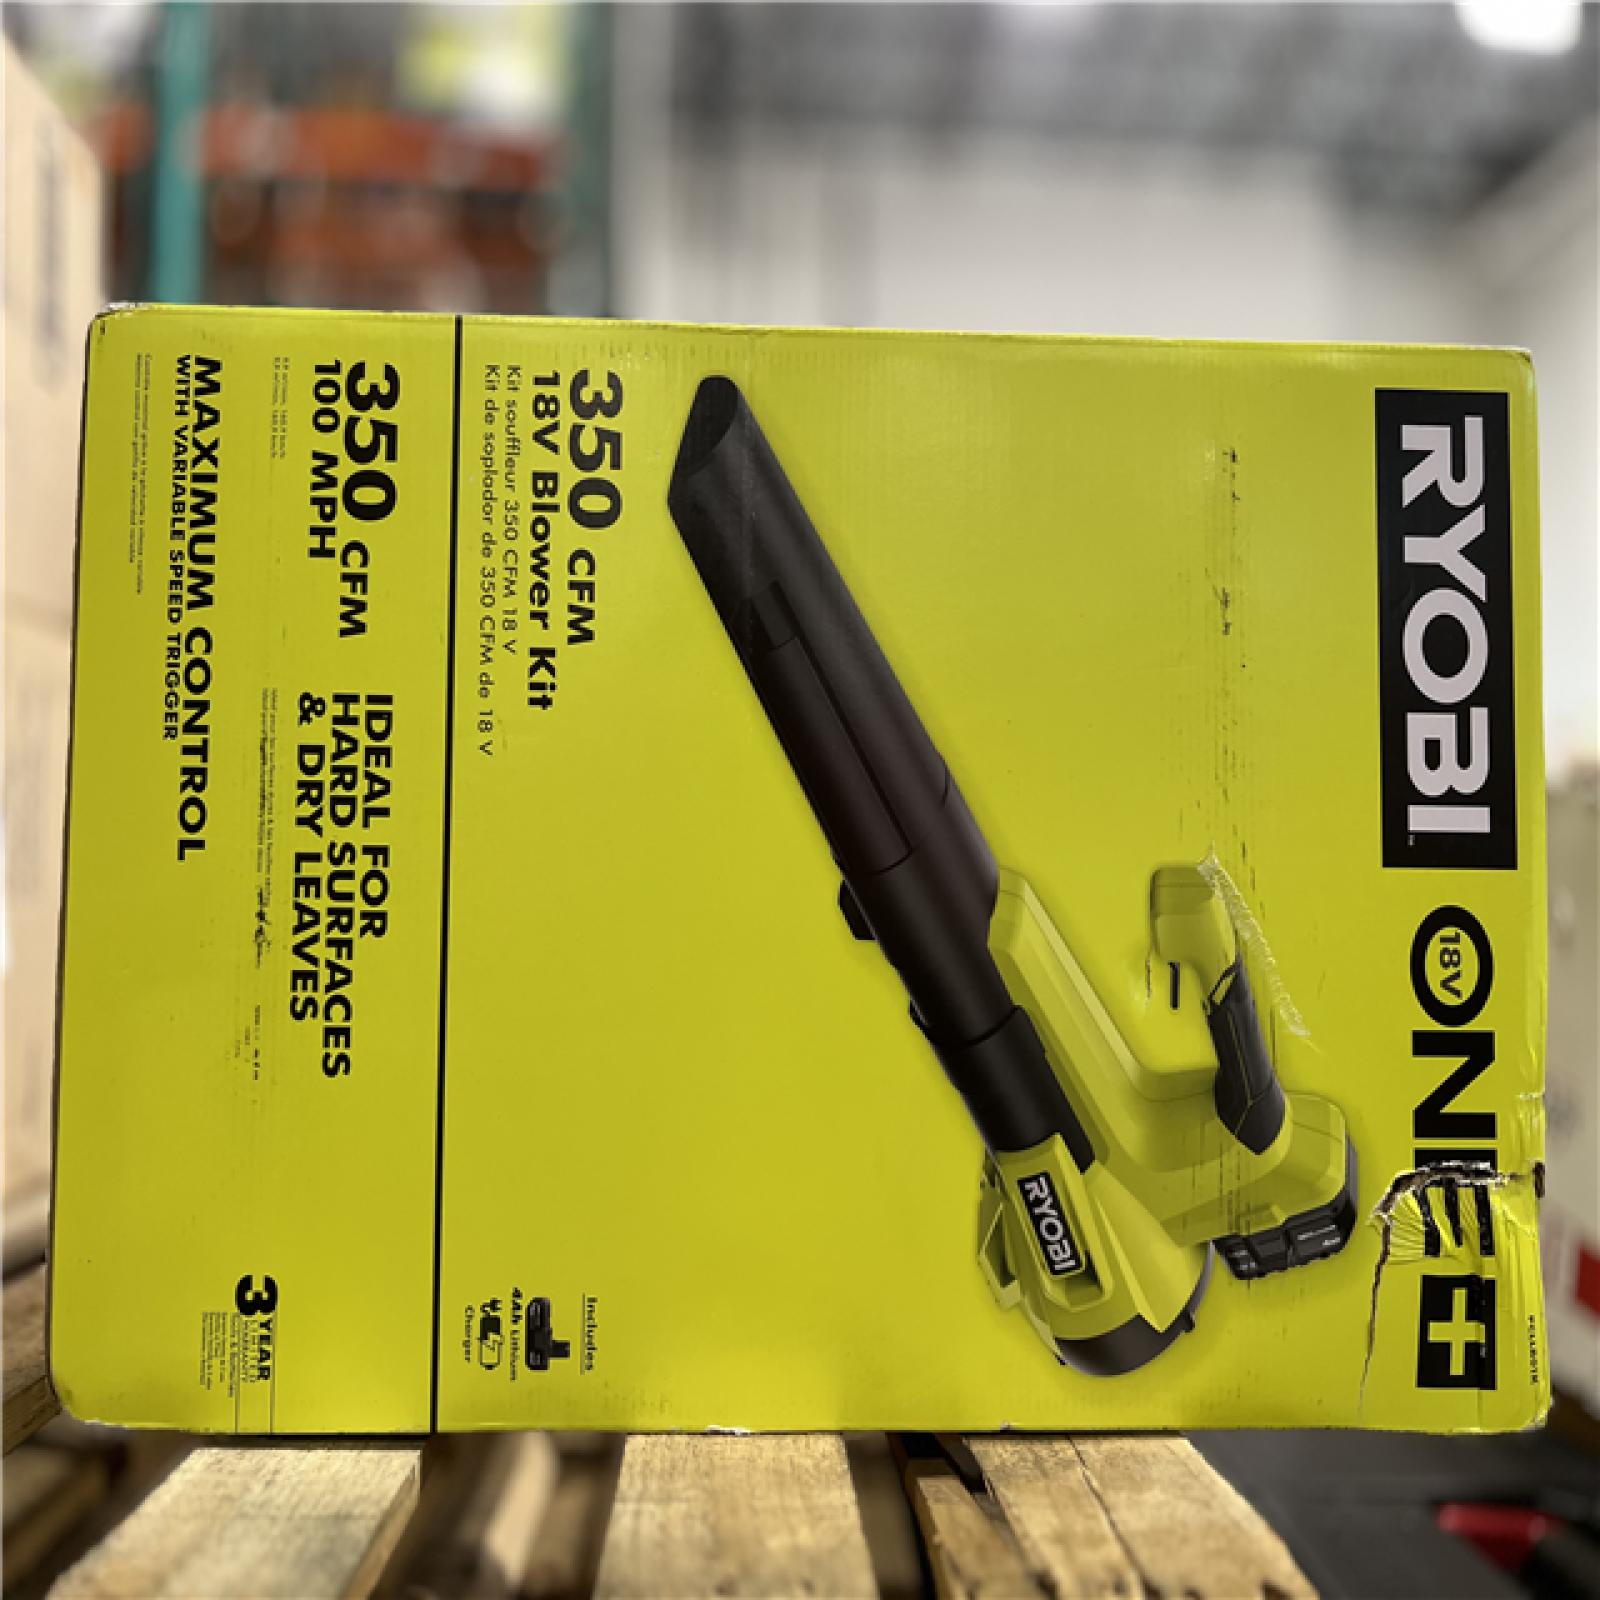 NEW! - RYOBI ONE+ 18V 100 MPH 350 CFM Cordless Battery Variable Speed Jet Fan Leaf Blower with 4.0 Ah Battery and Charger